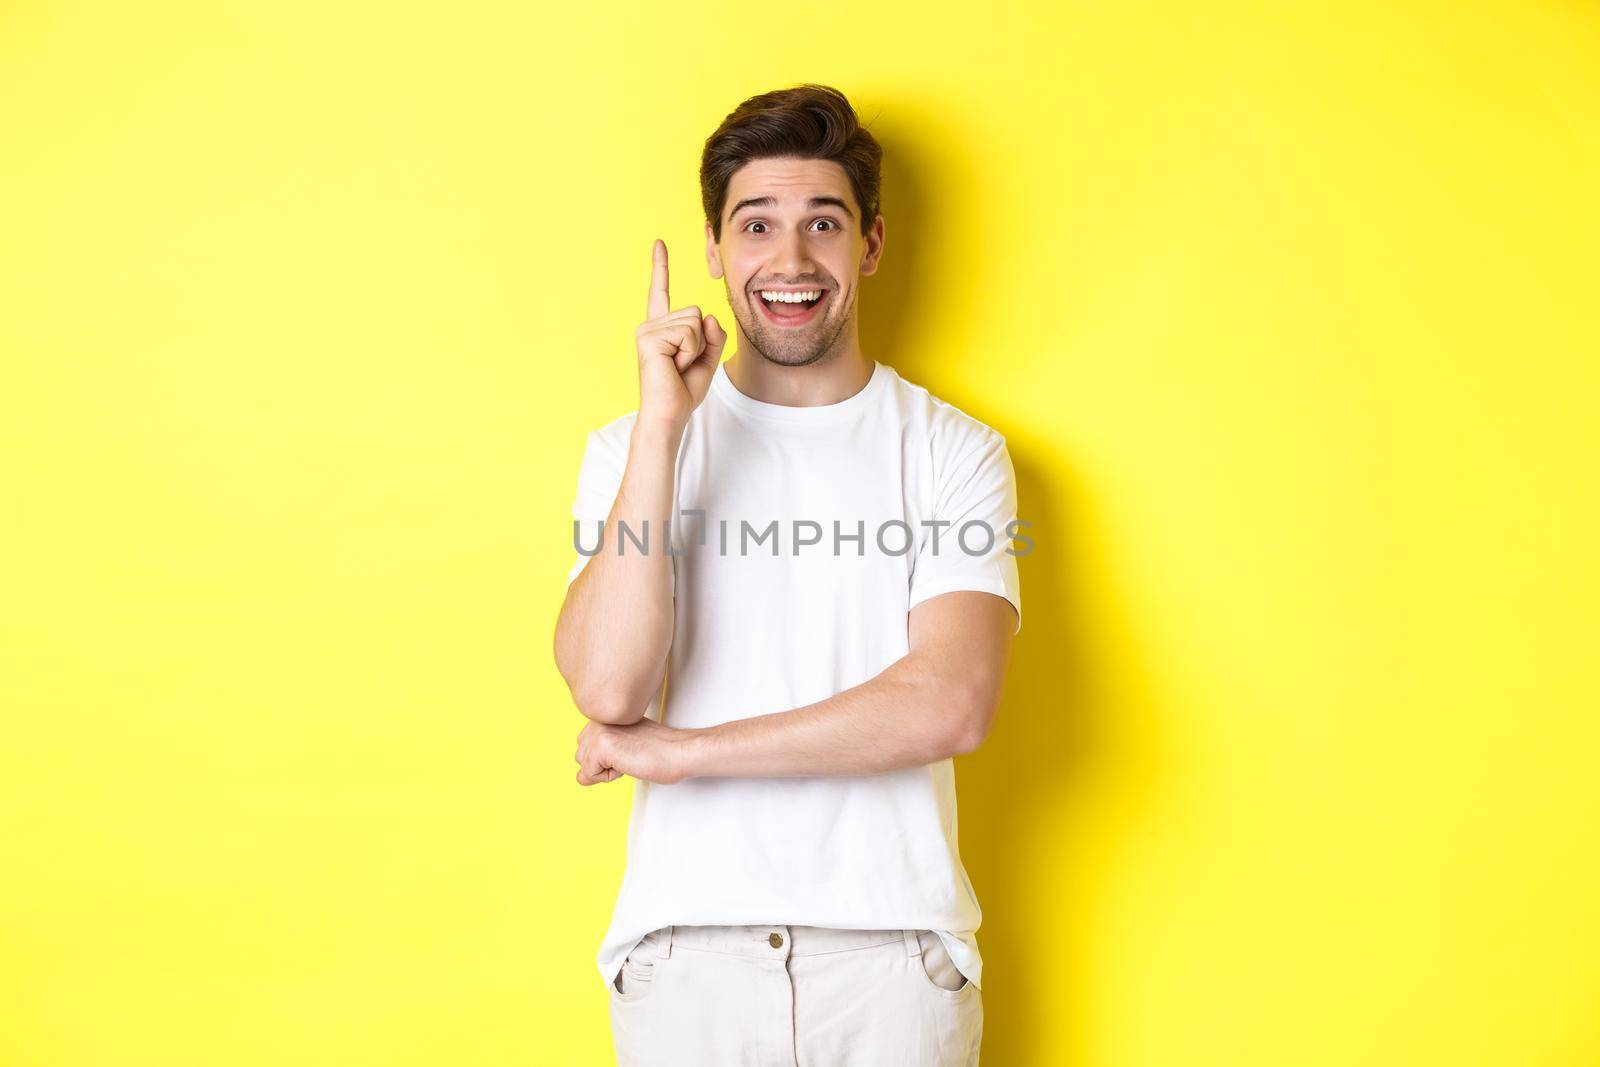 Image of attractive guy having an idea, raising finger up and suggesting plan, smiling excited, standing over yellow background.